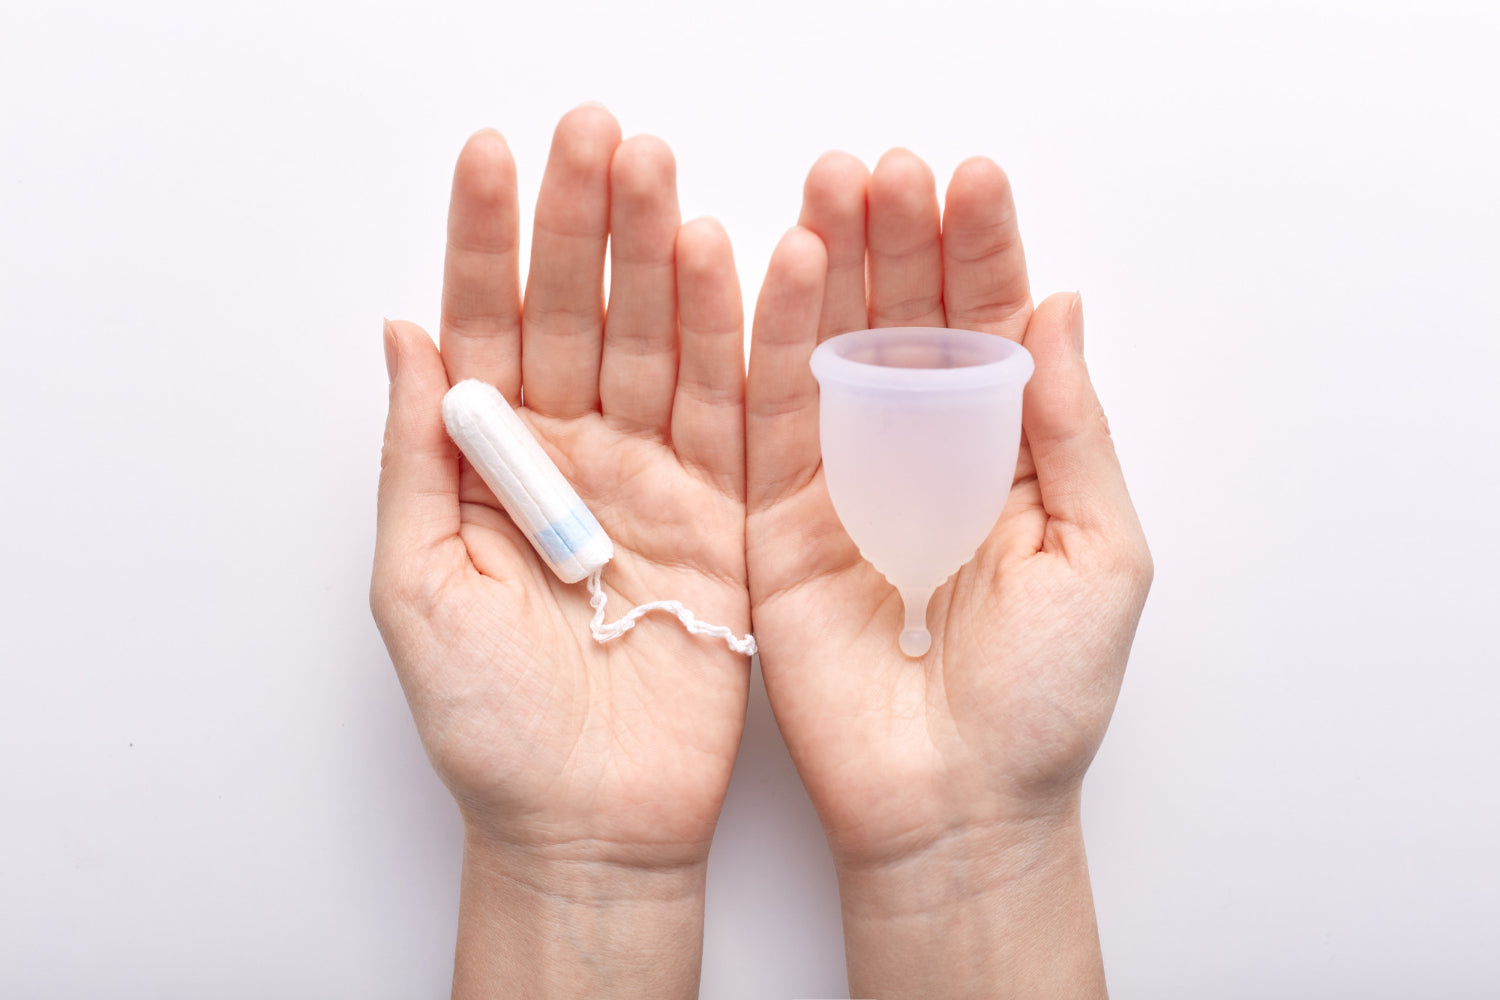 Pads, Tampons or Menstrual Cup? – How to Decide Which Option is